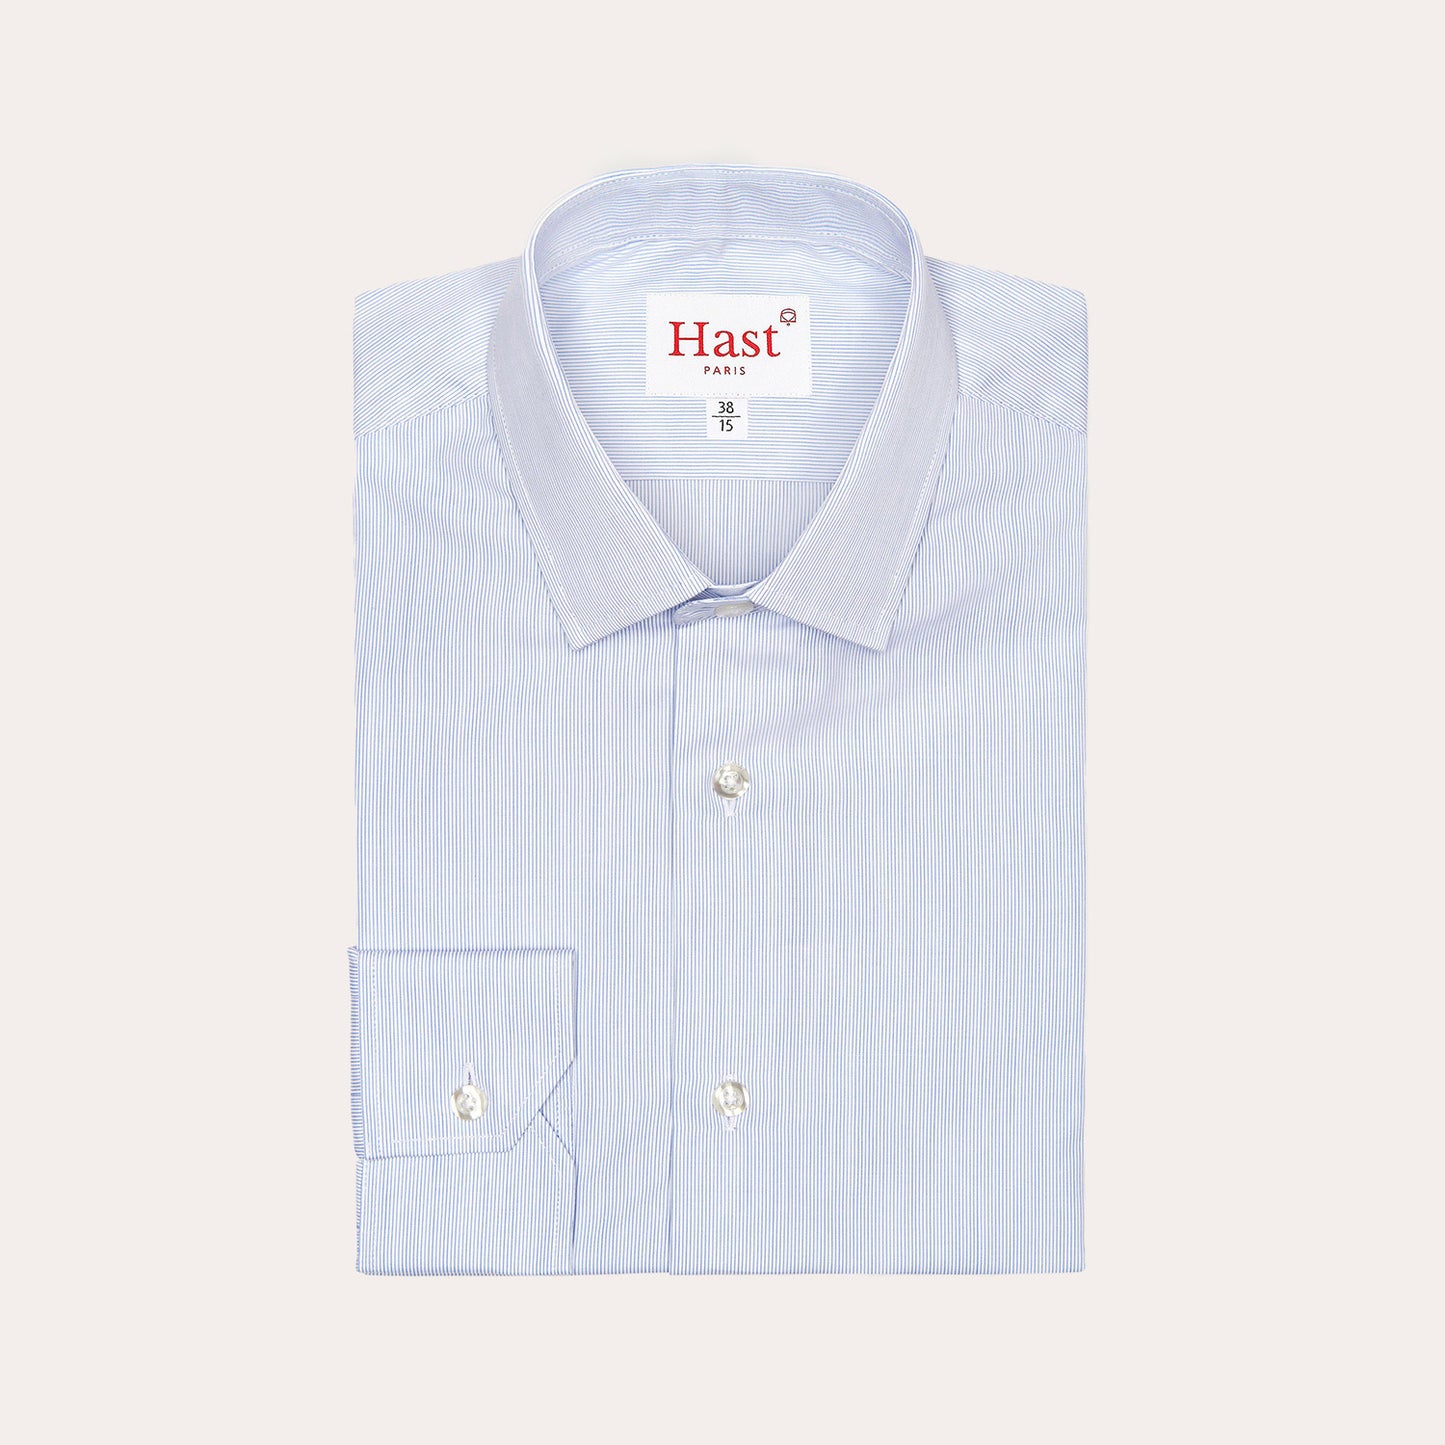 Fitted shirt in faux-plain double-twisted poplin with fine blue stripes